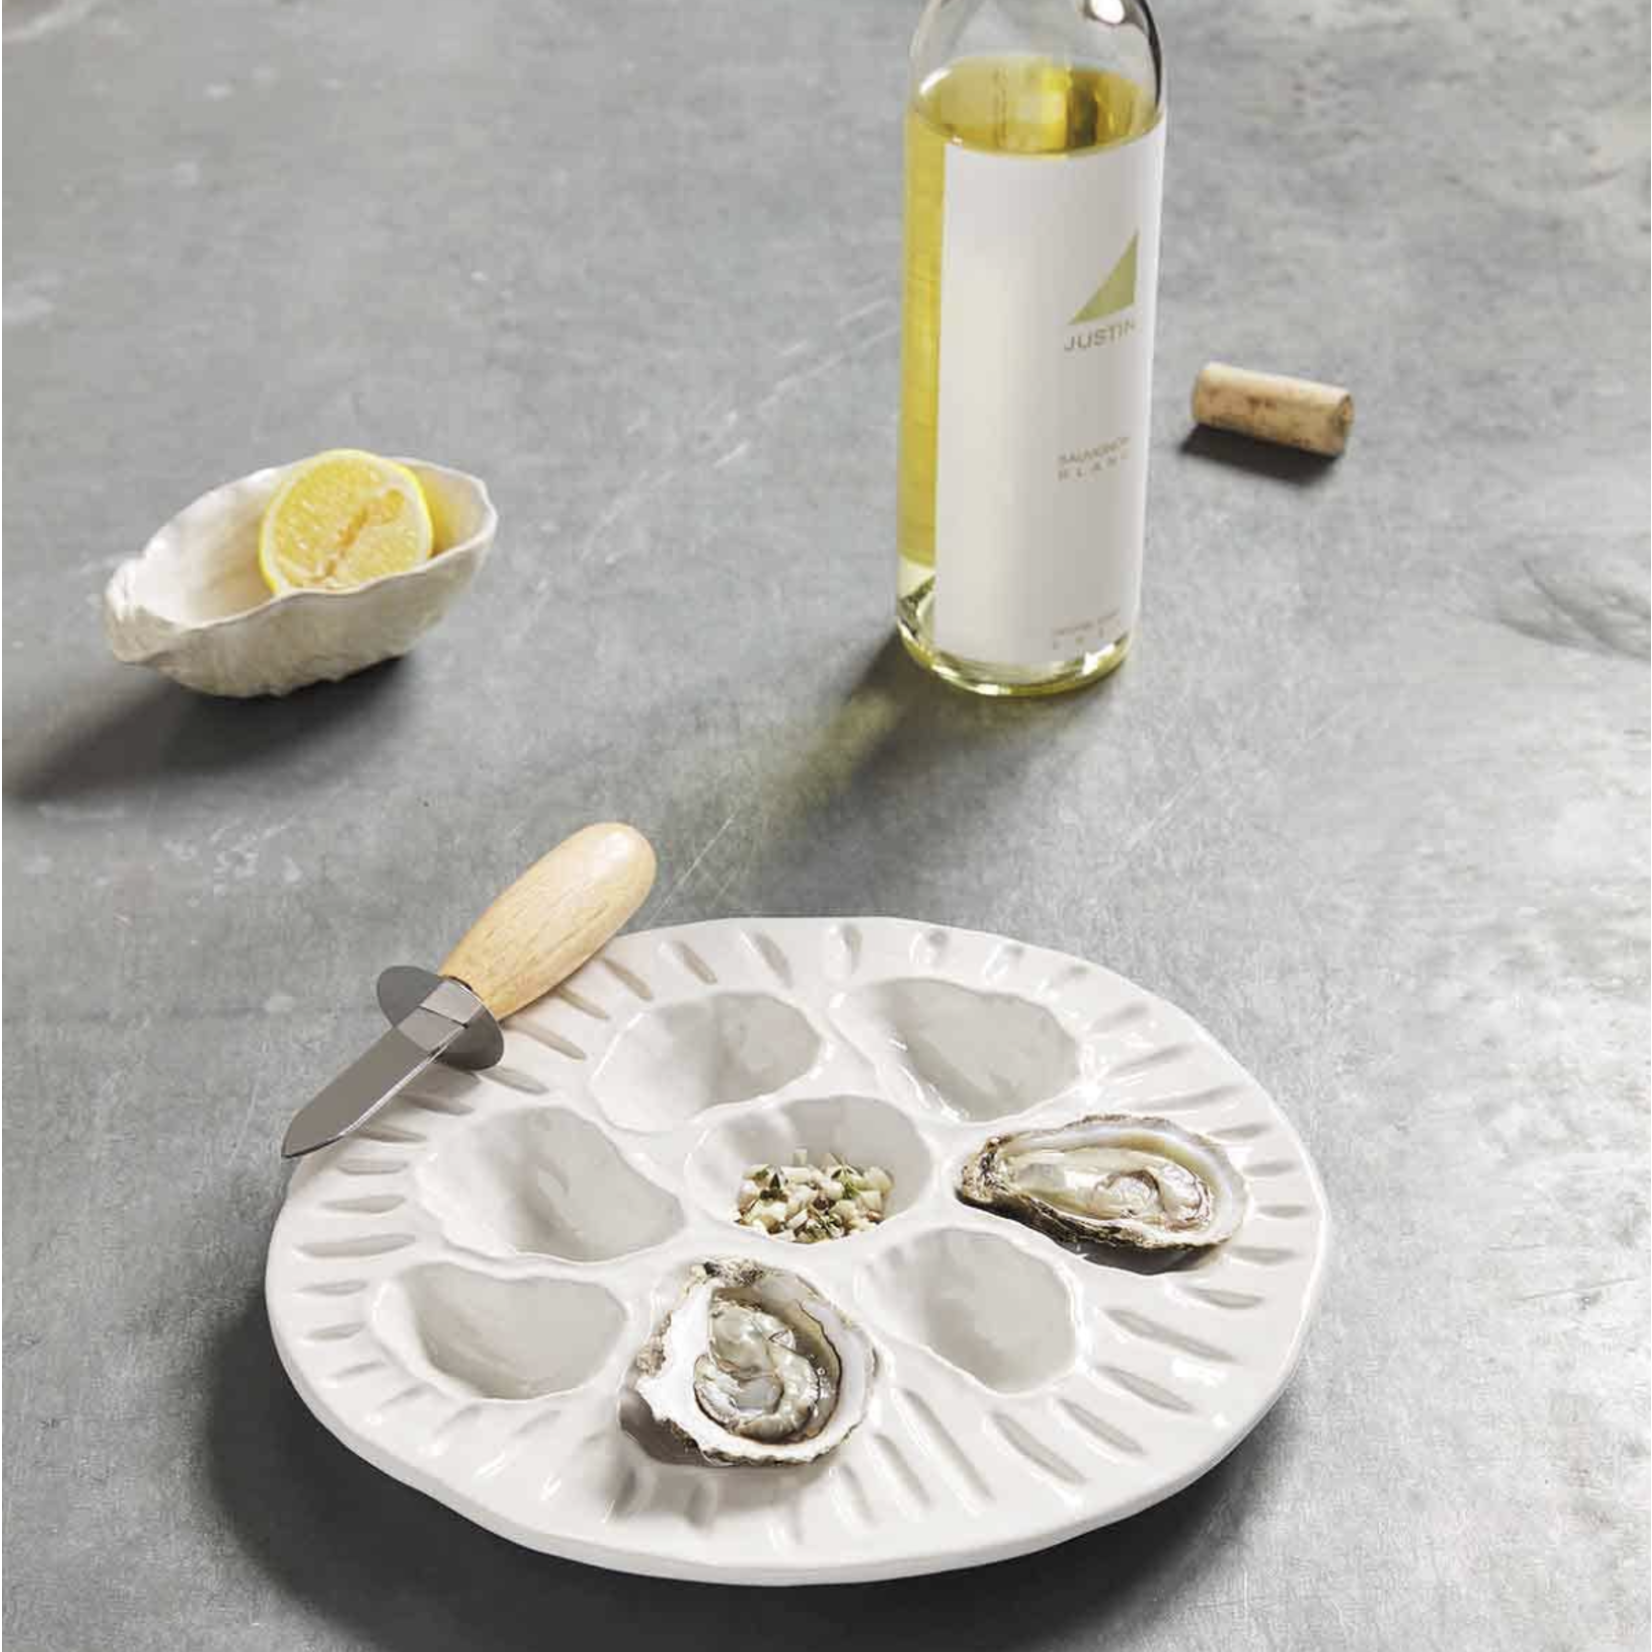 Outside The Box 11" Ceramic Oyster Serving Plate & Knife Set